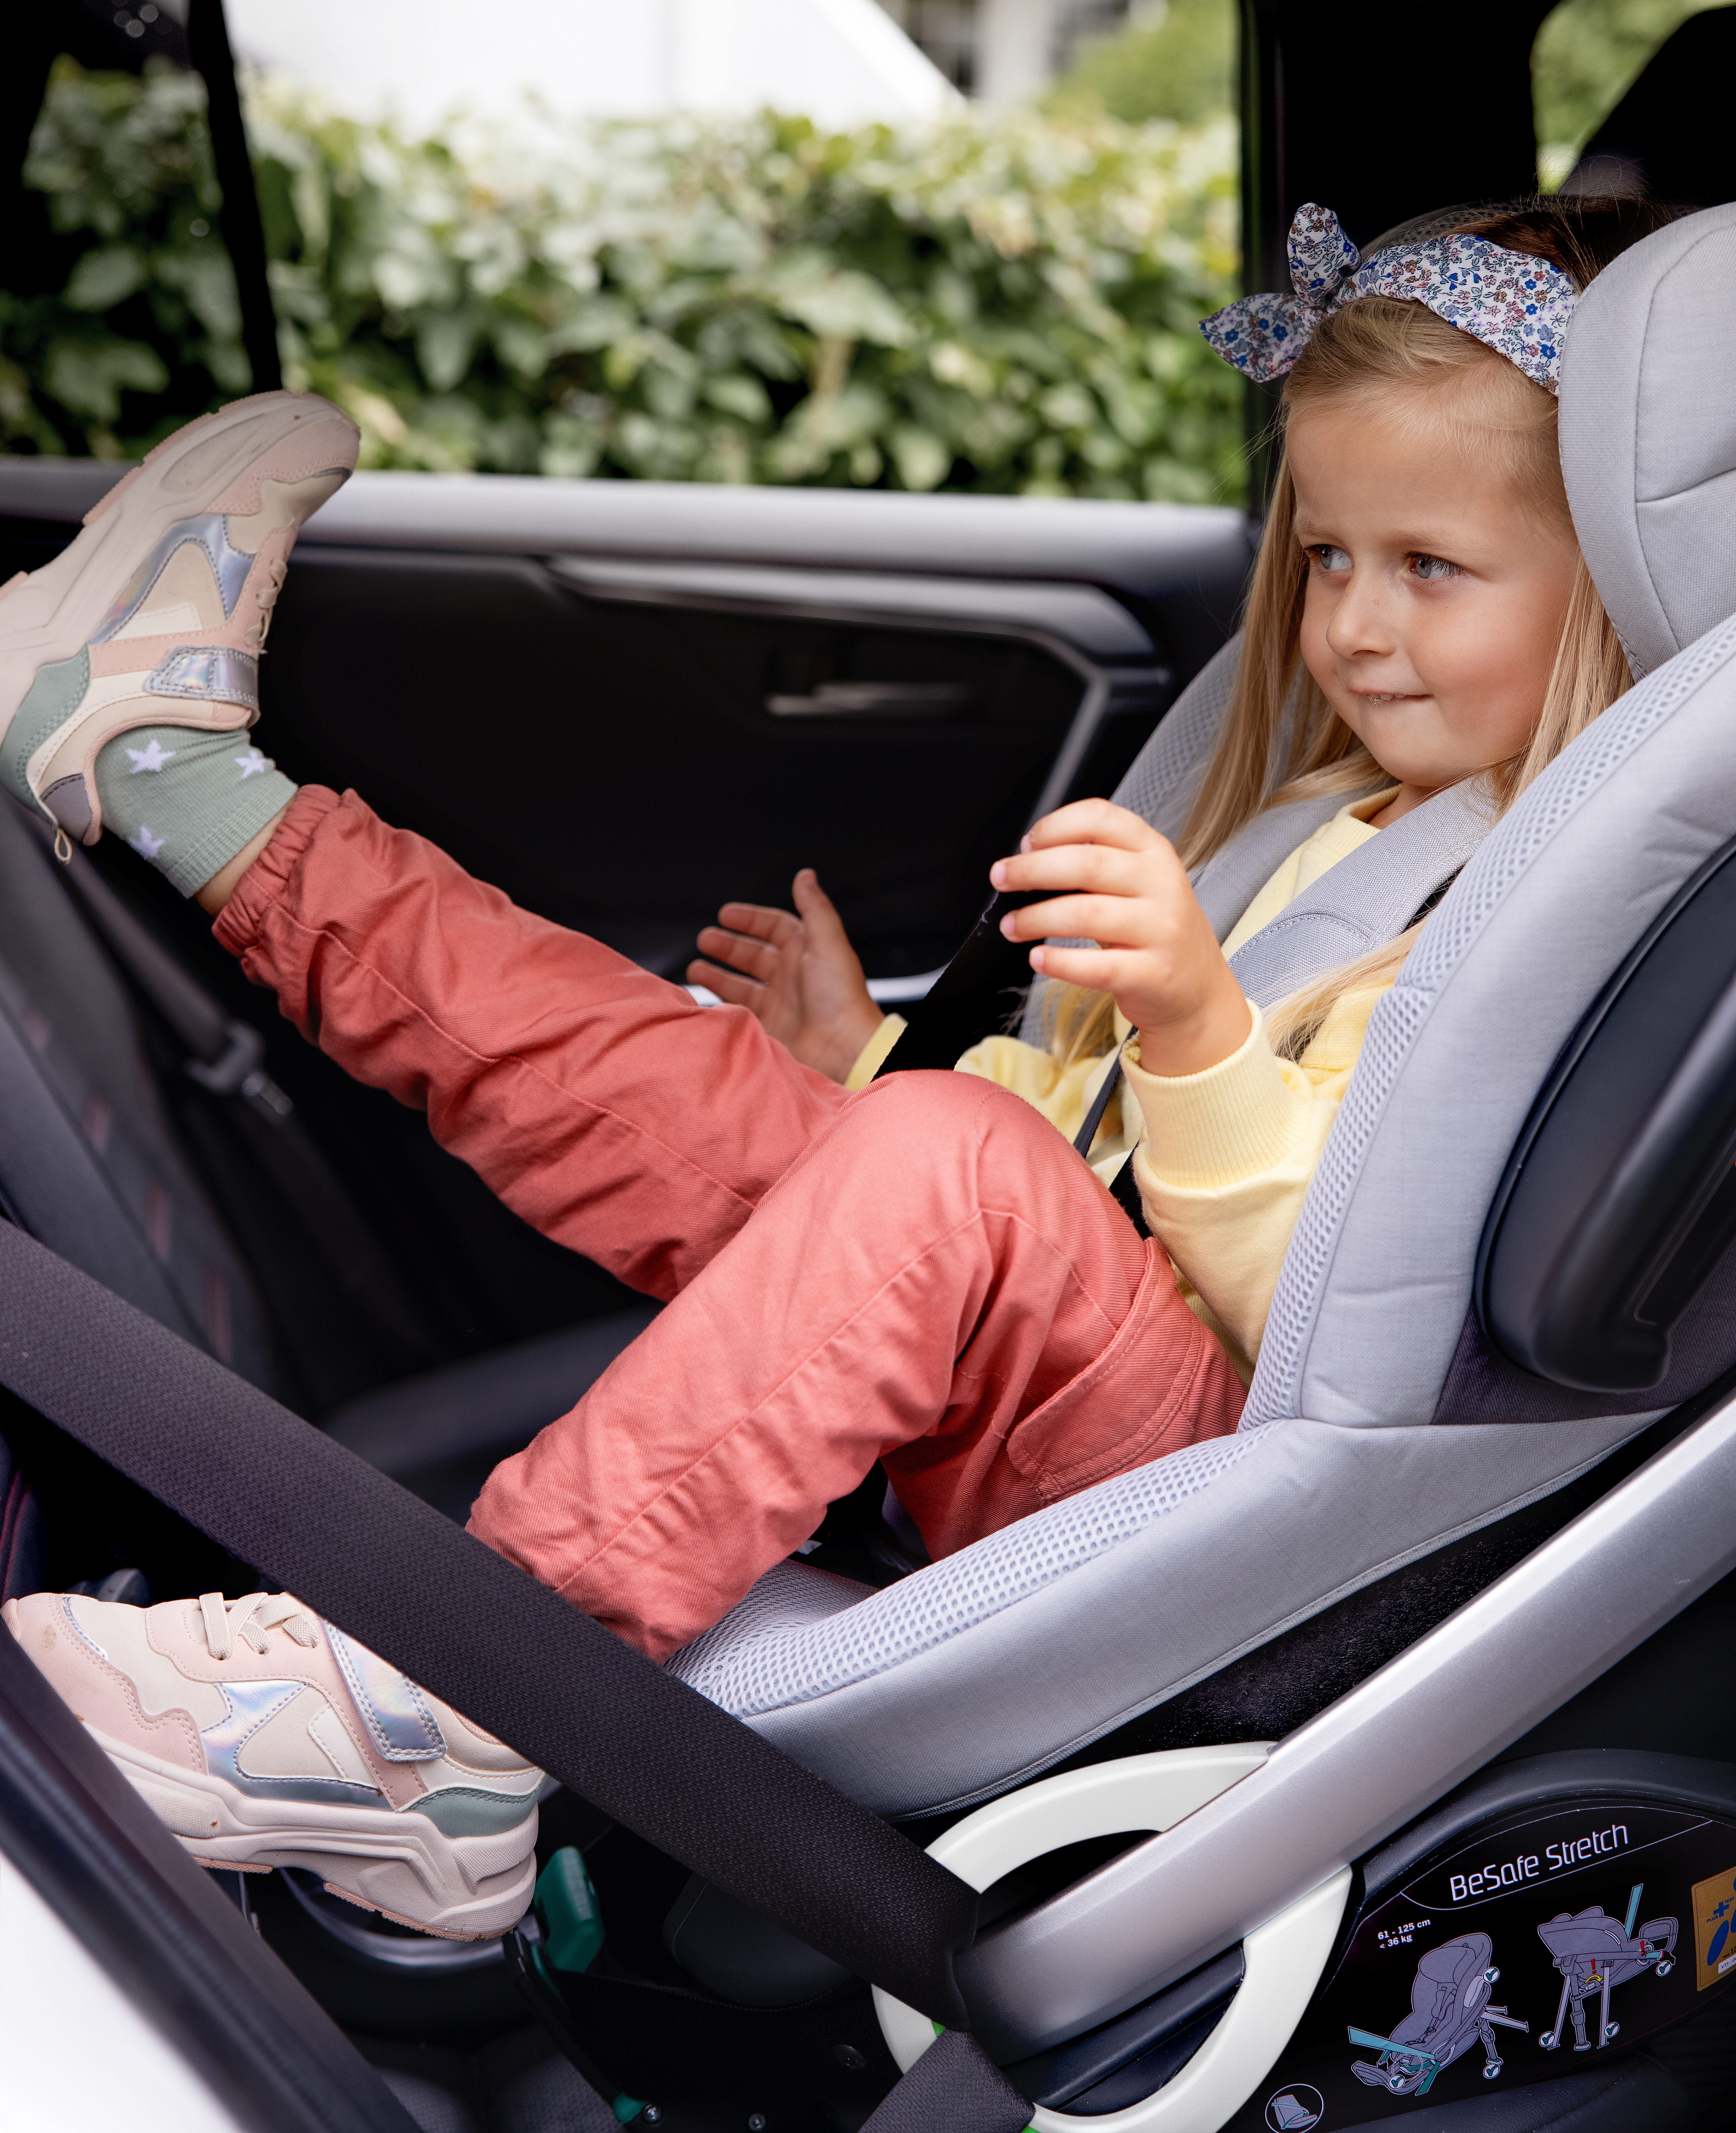 Misconceptions about rear facing car seats